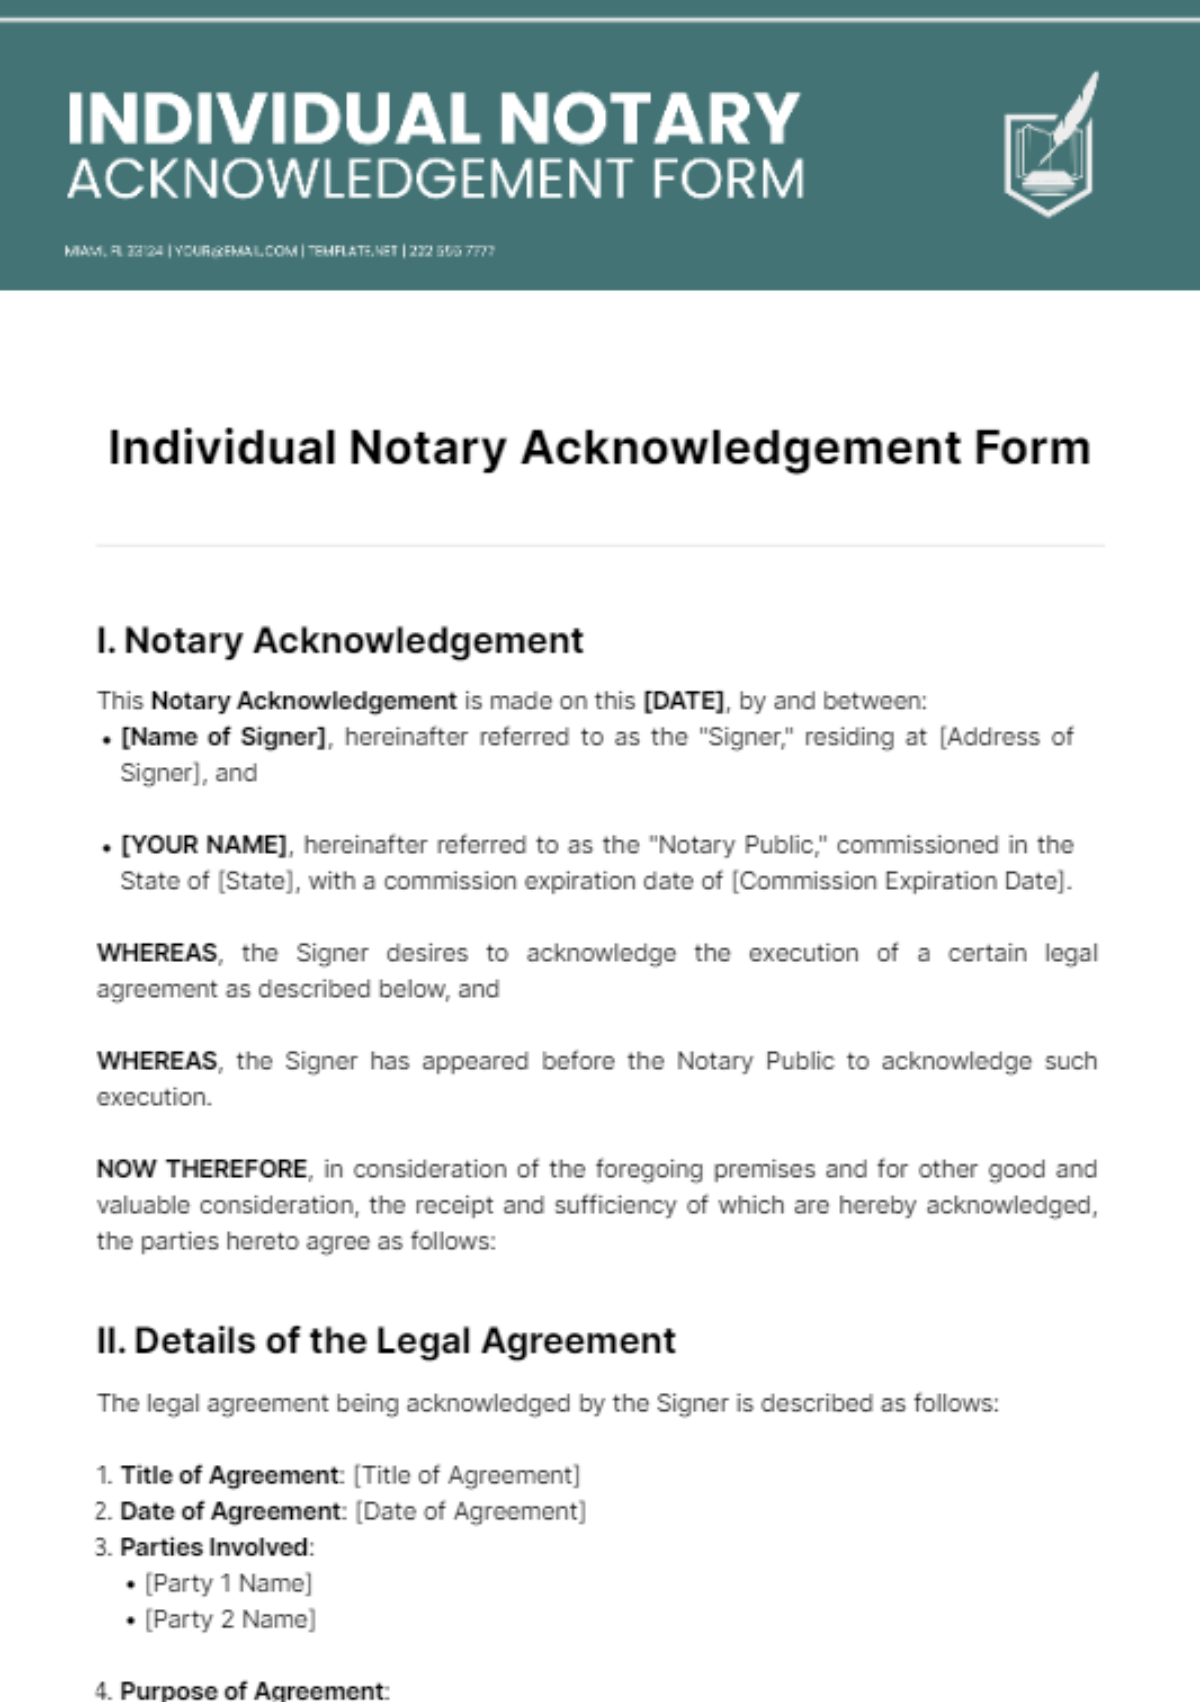 Individual Notary Acknowledgement Form Template